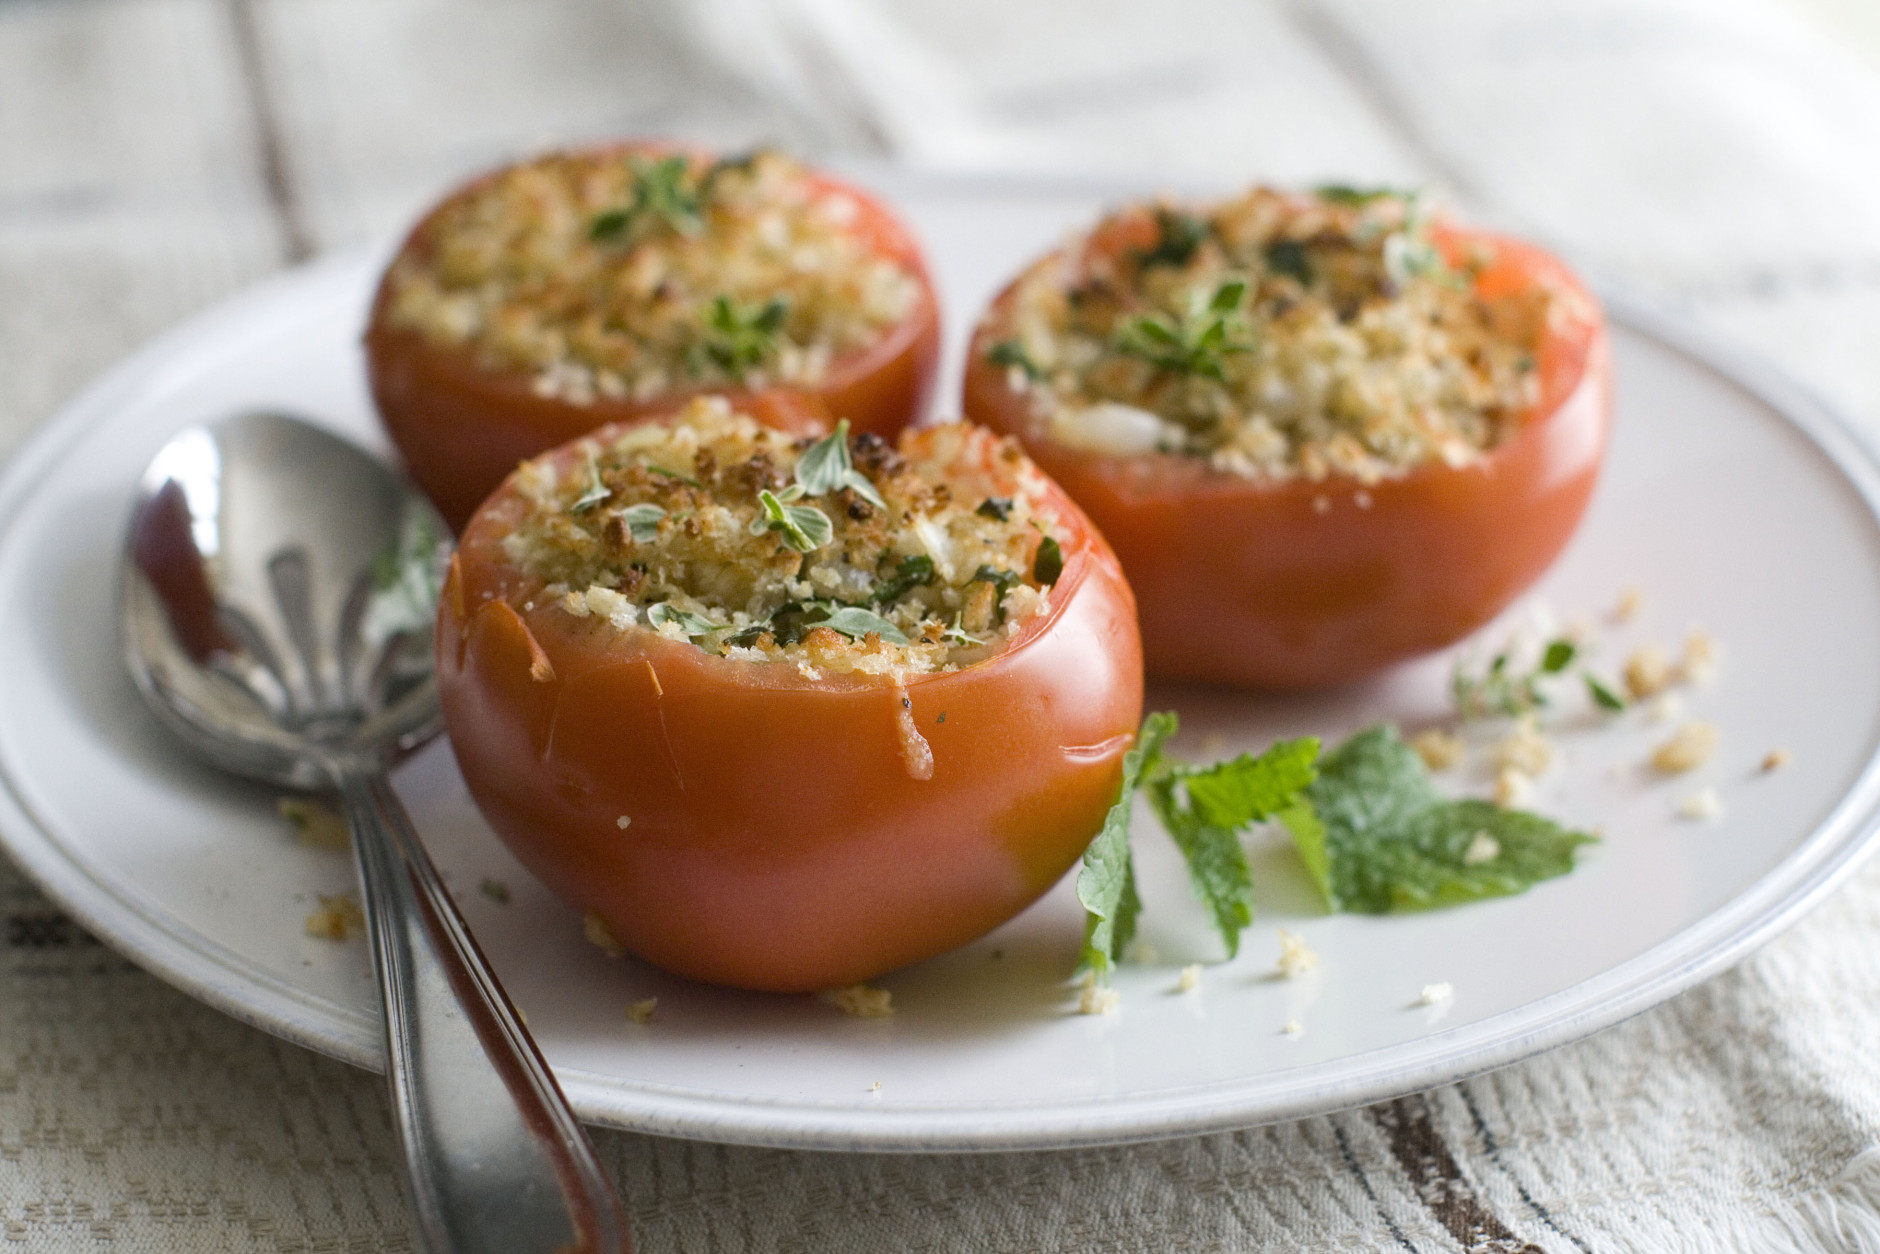 This June 30, 2014 photo shows cheese stuffed tomatoes in Concord, N.H. (AP Photo/Matthew Mead)